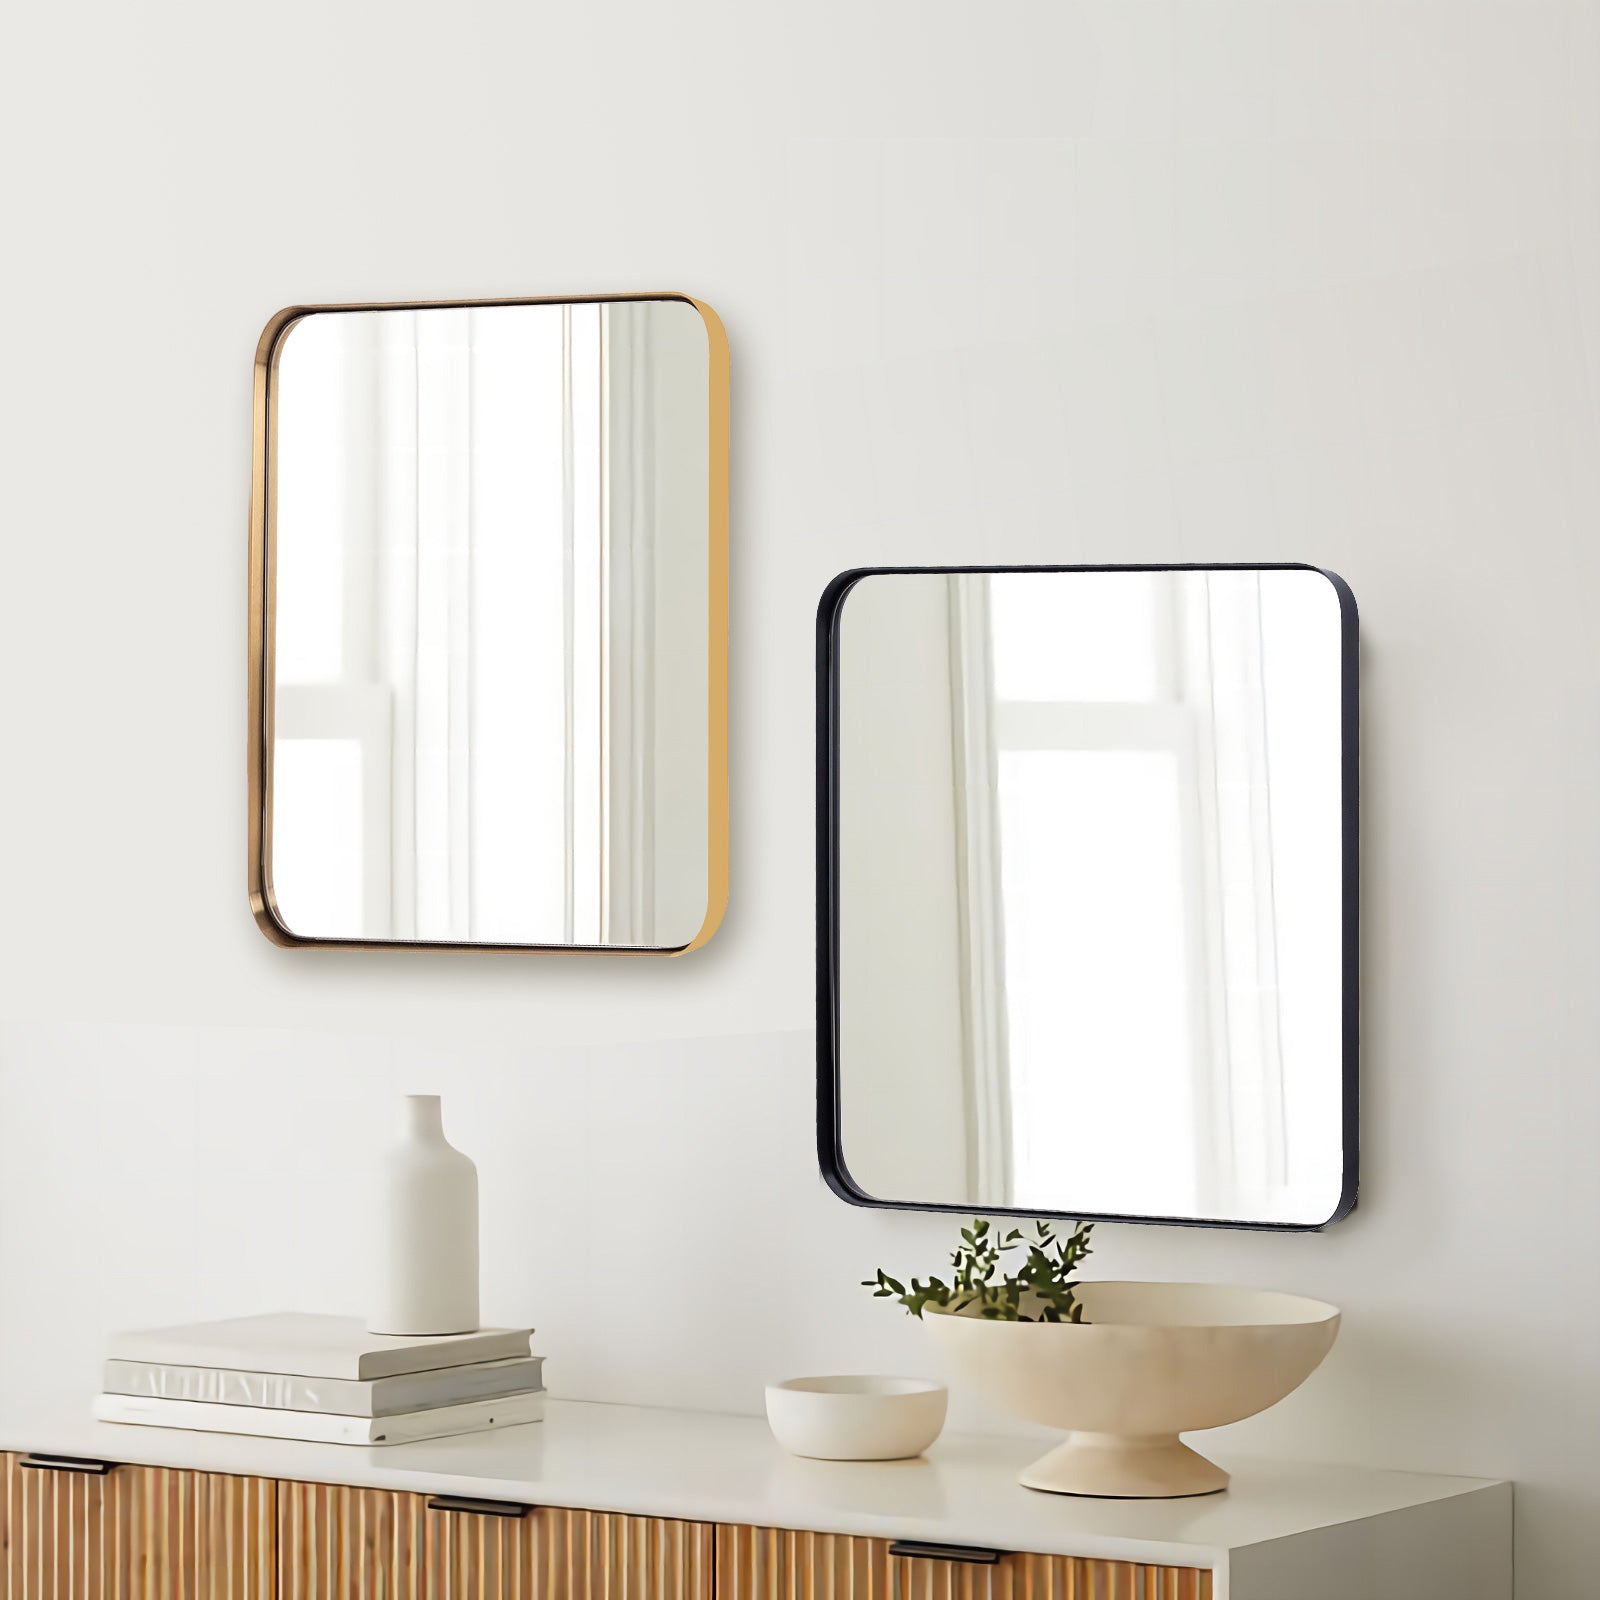 Open Box Like New : Rounded Rectangle Mirrors Stainless Steel Frames